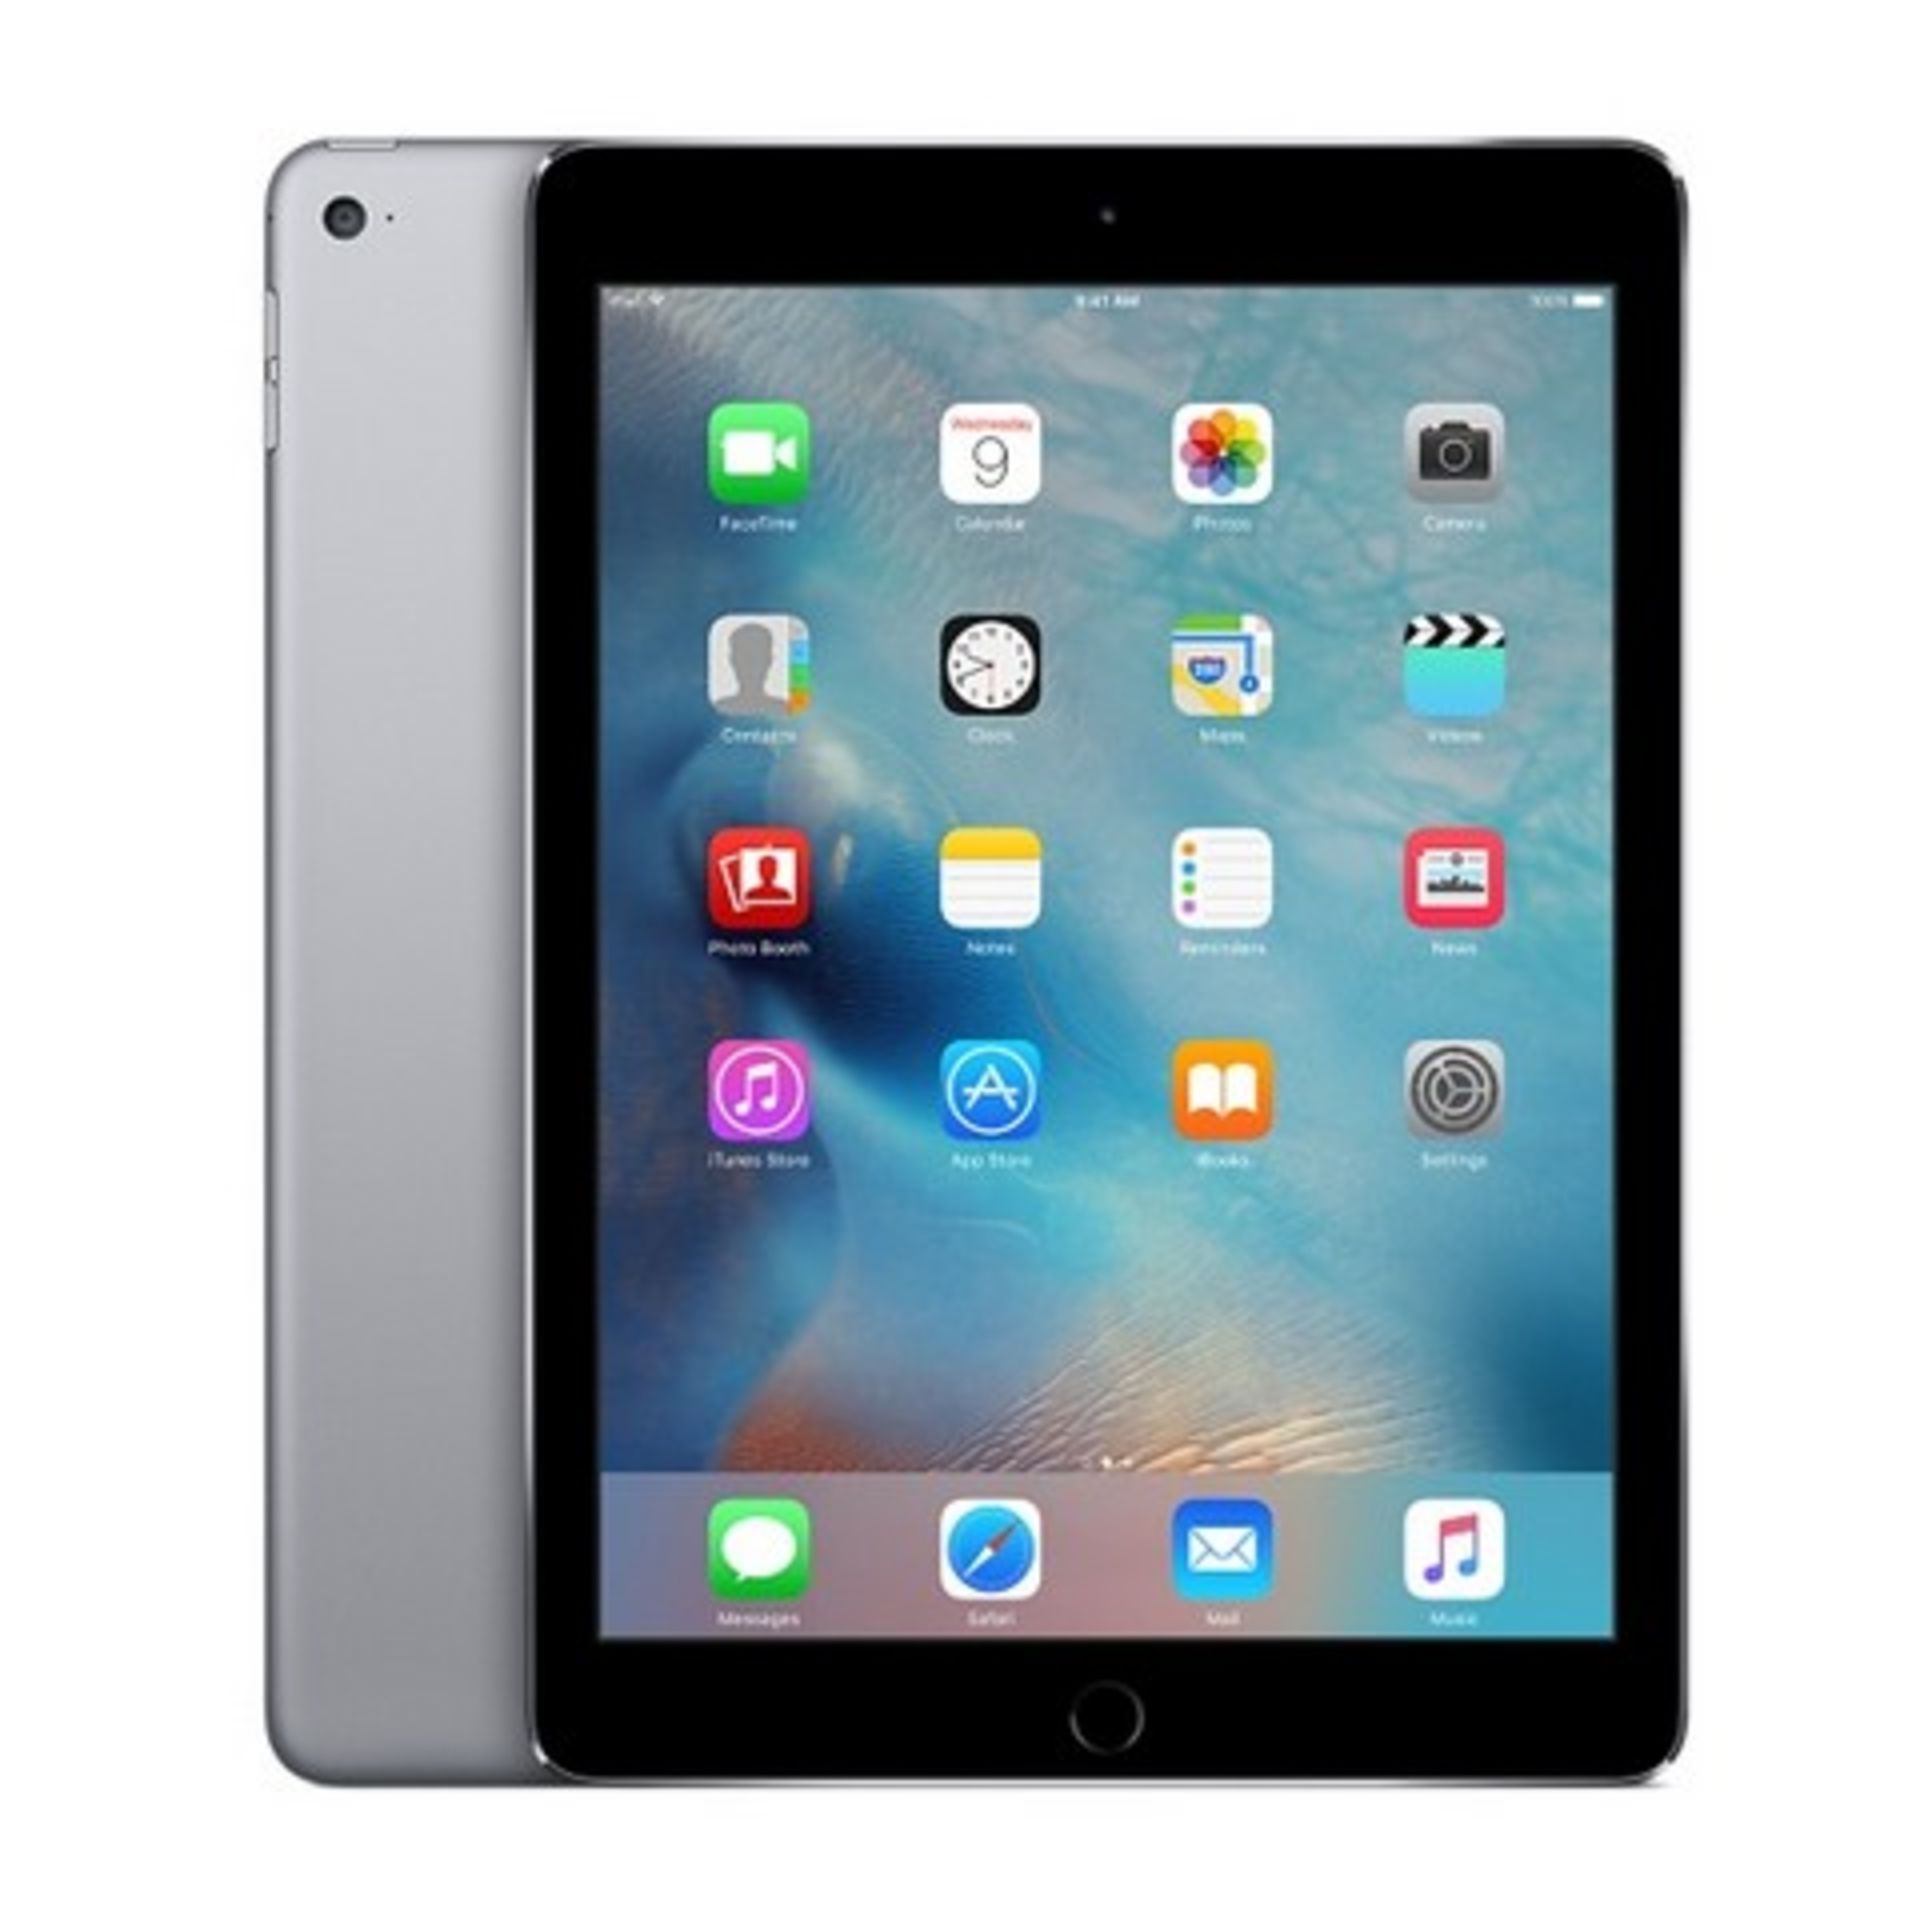 V Grade A Apple iPad Air 2 16GB Space Grey - Wi-Fi - In Generic Box - With Apple Accessories